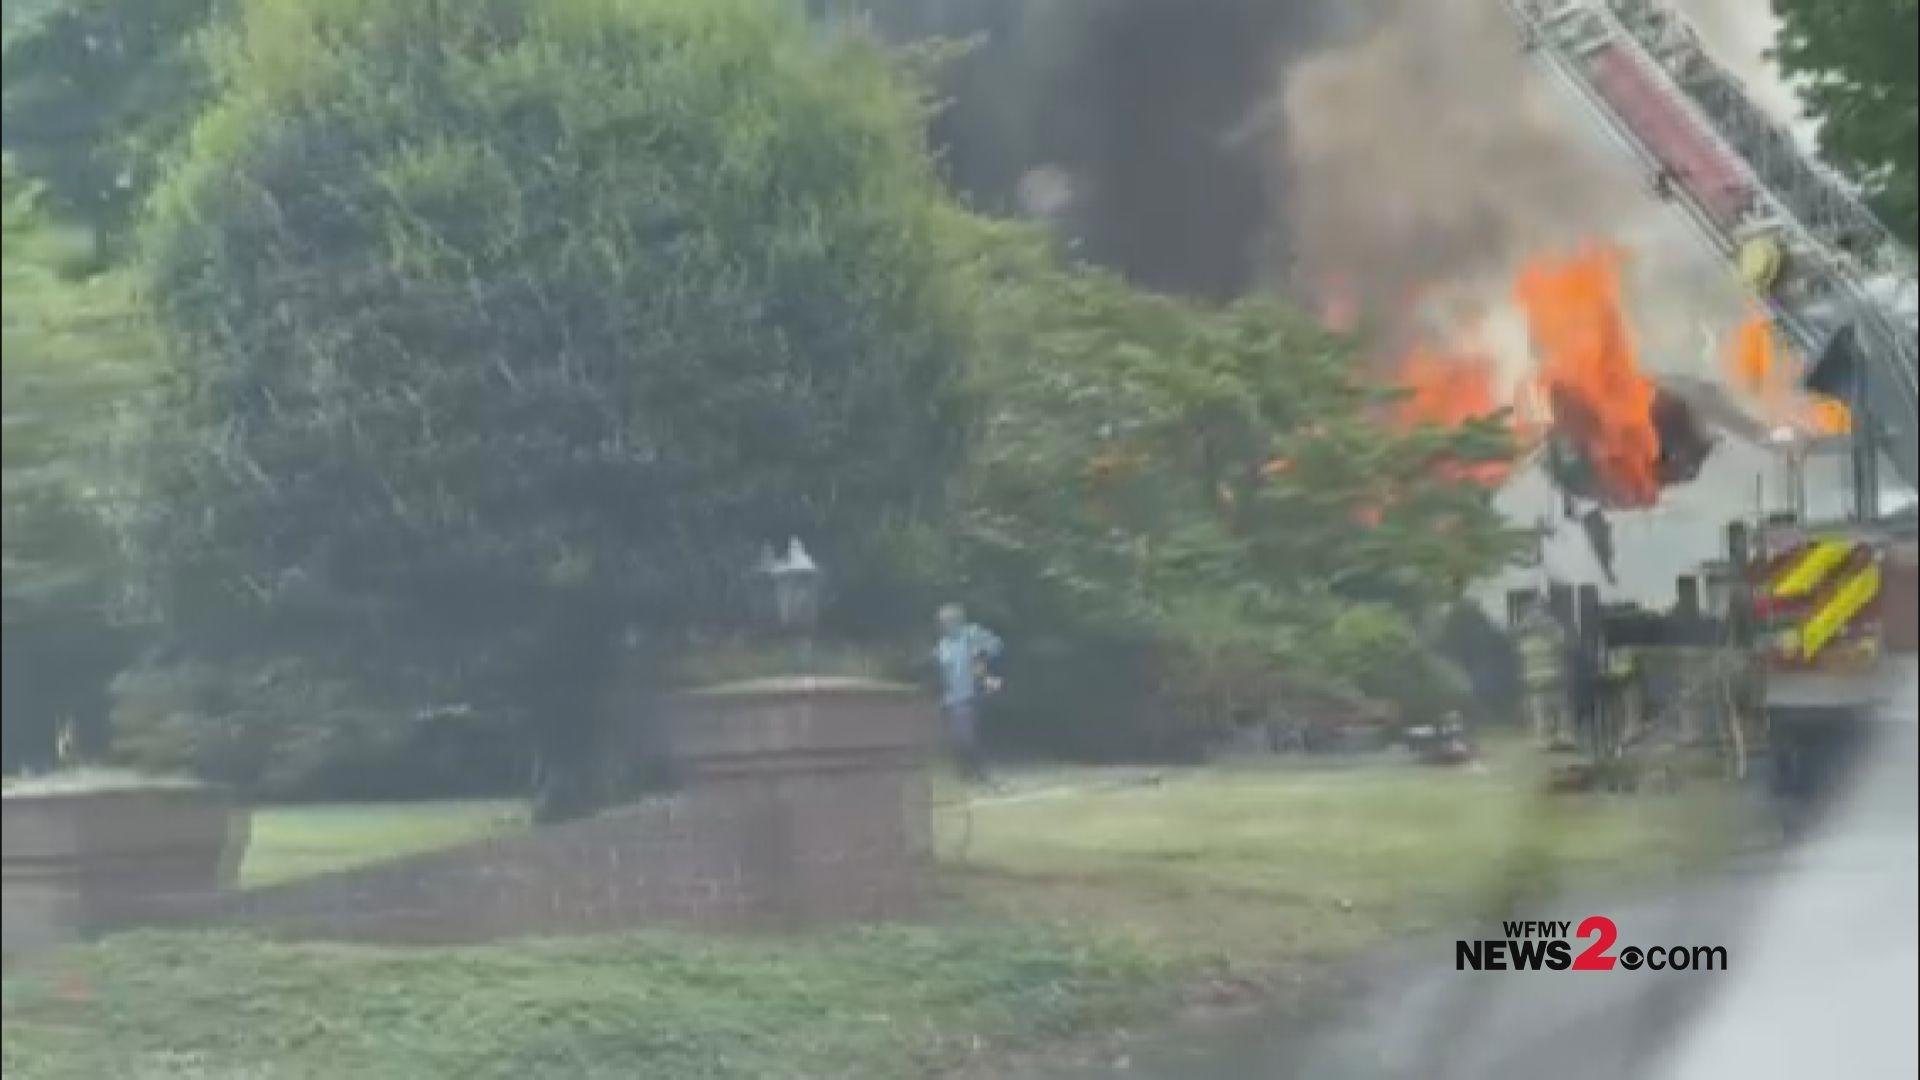 The Greensboro Fire Department said they are conducting a live fire training on the 1800 block of New Garden Road.